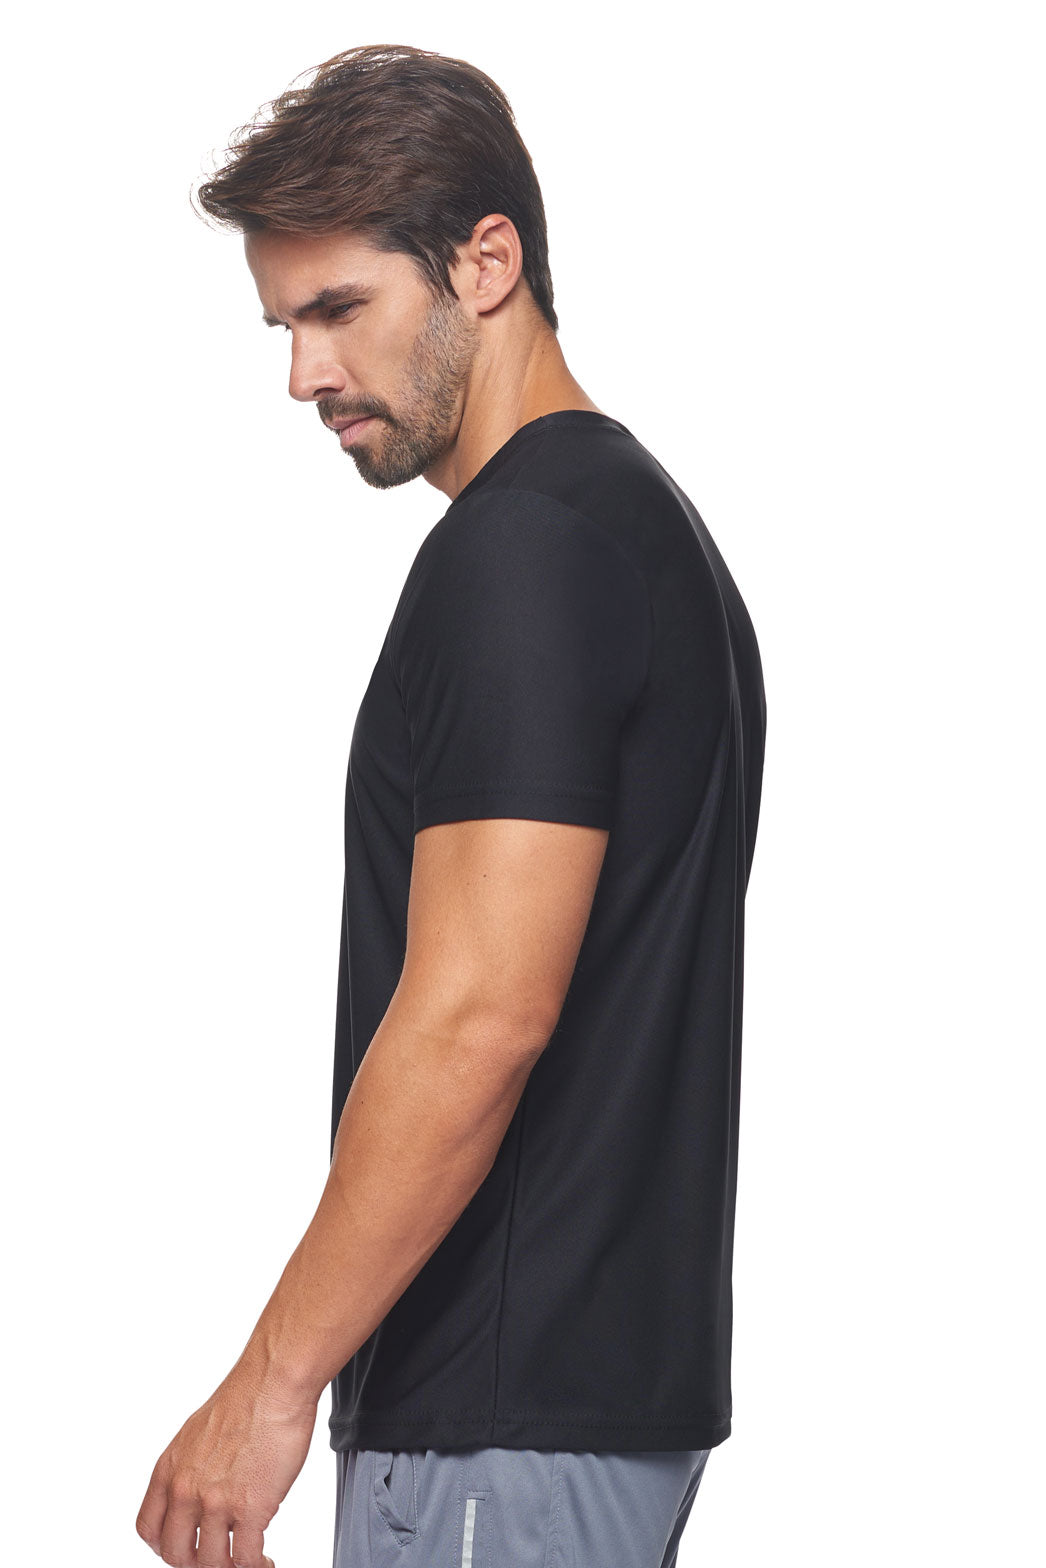 Expert Brand Apparel Made in USA Recycled Polyester Repreve Performance Tee Unisex RP801U black image 2#black